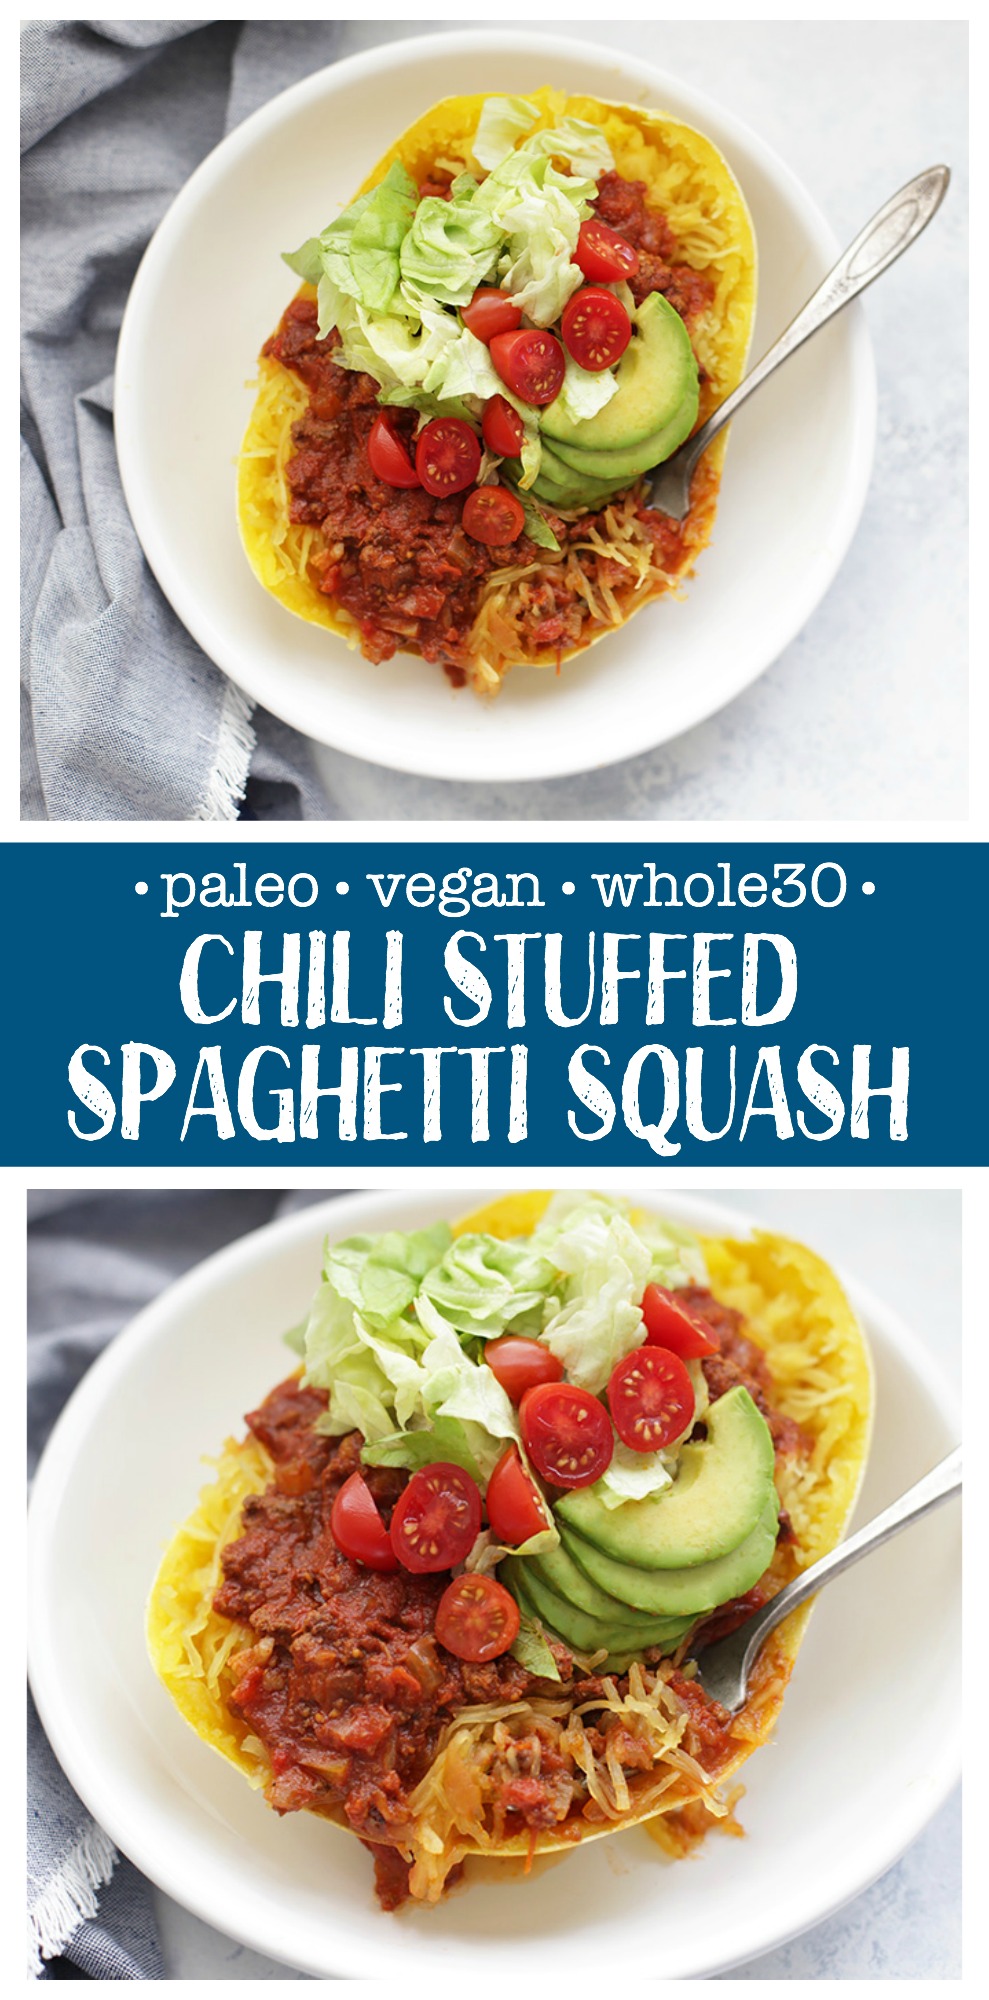 Chili Stuffed Spaghetti Squash - Such a delicious low-carb dinner! This can be made paleo or vegan based on the chili you use. We love these! 